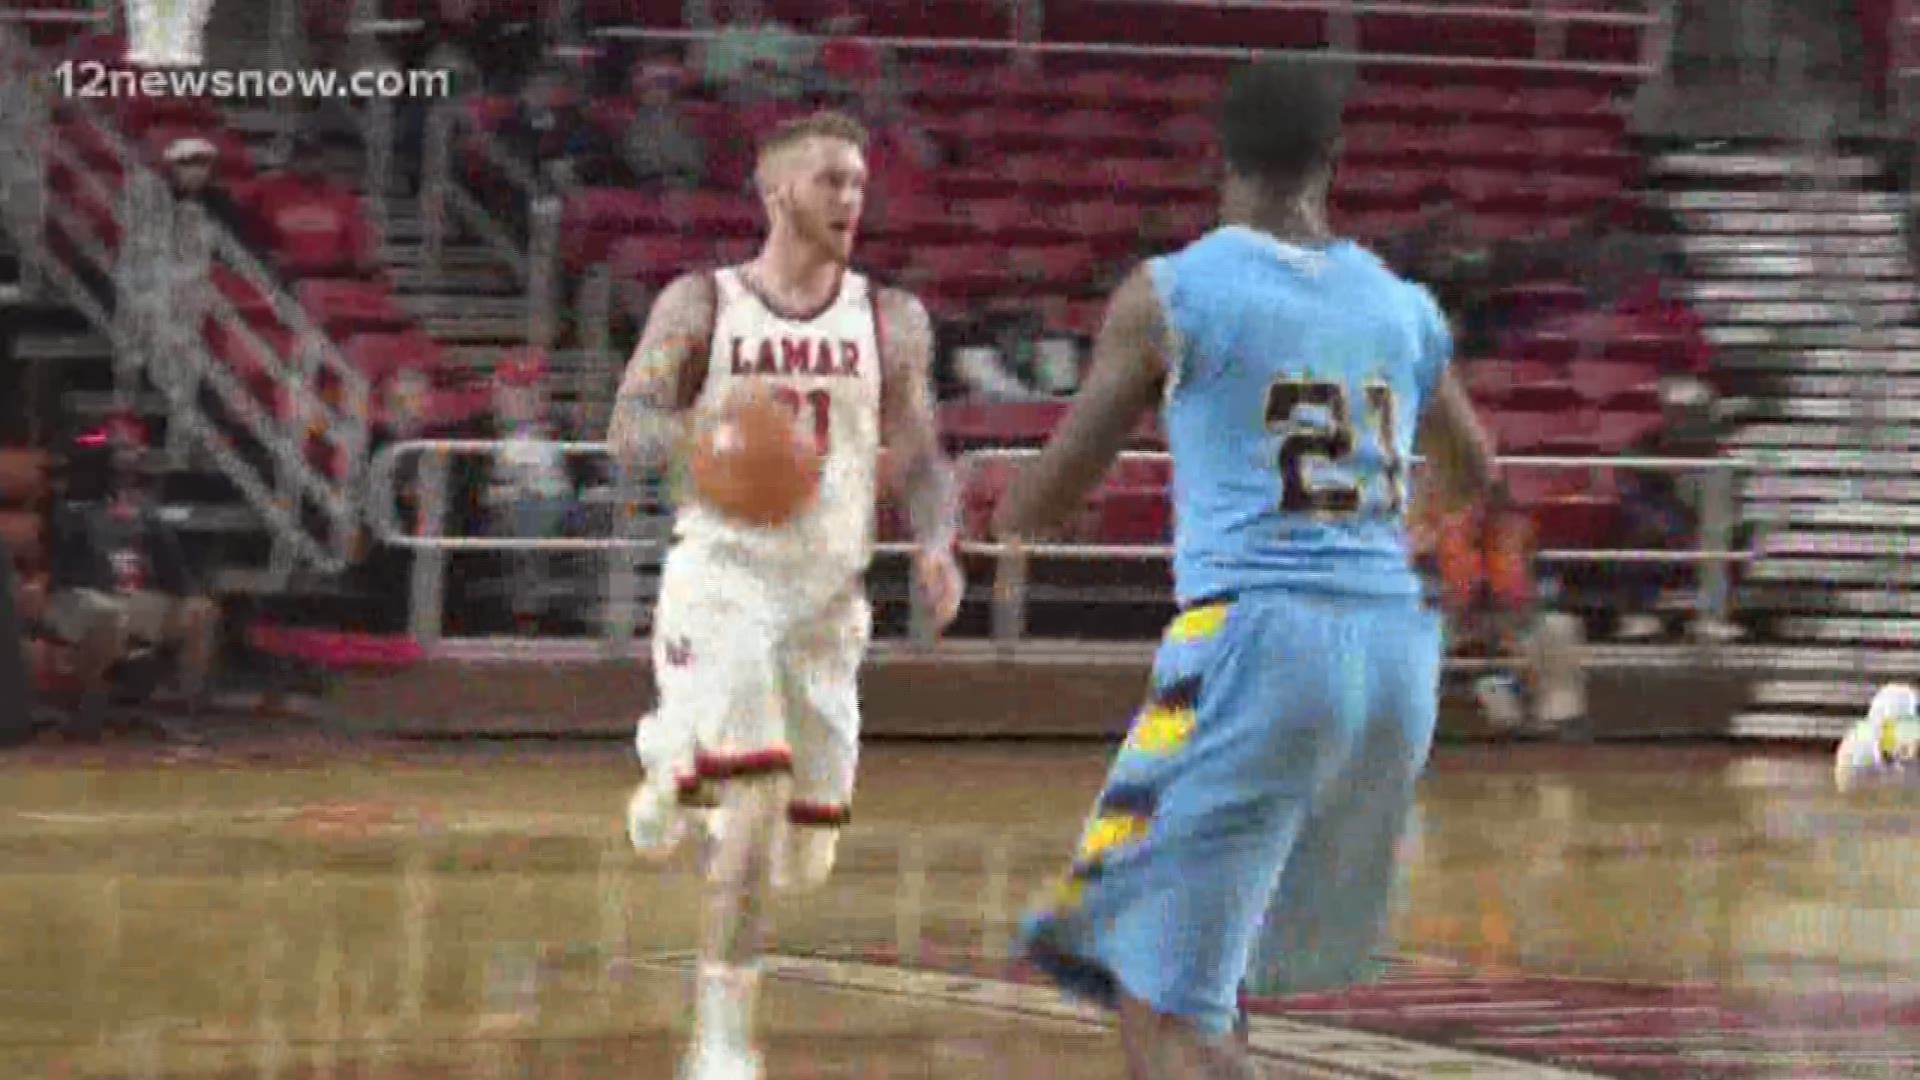 Lamar improves to 4-1 as Nick Garth scores 25 points off the bench